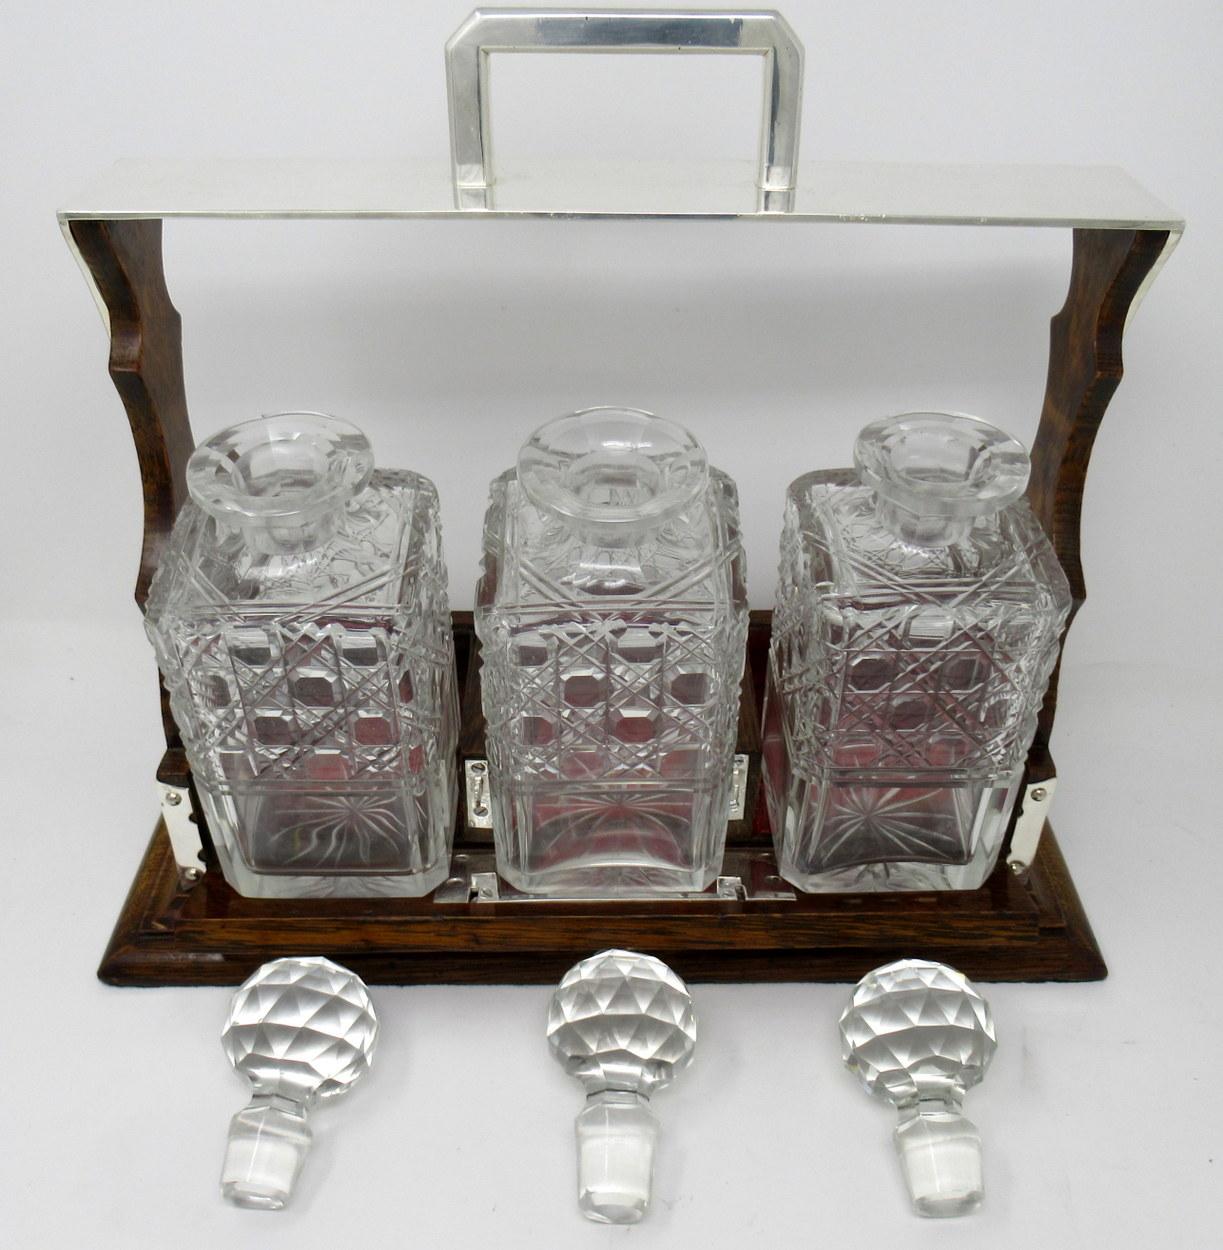 Polished Victorian Cut Crystal Oak Framed Tantalus Decanter Silver Mounted, 19th Century